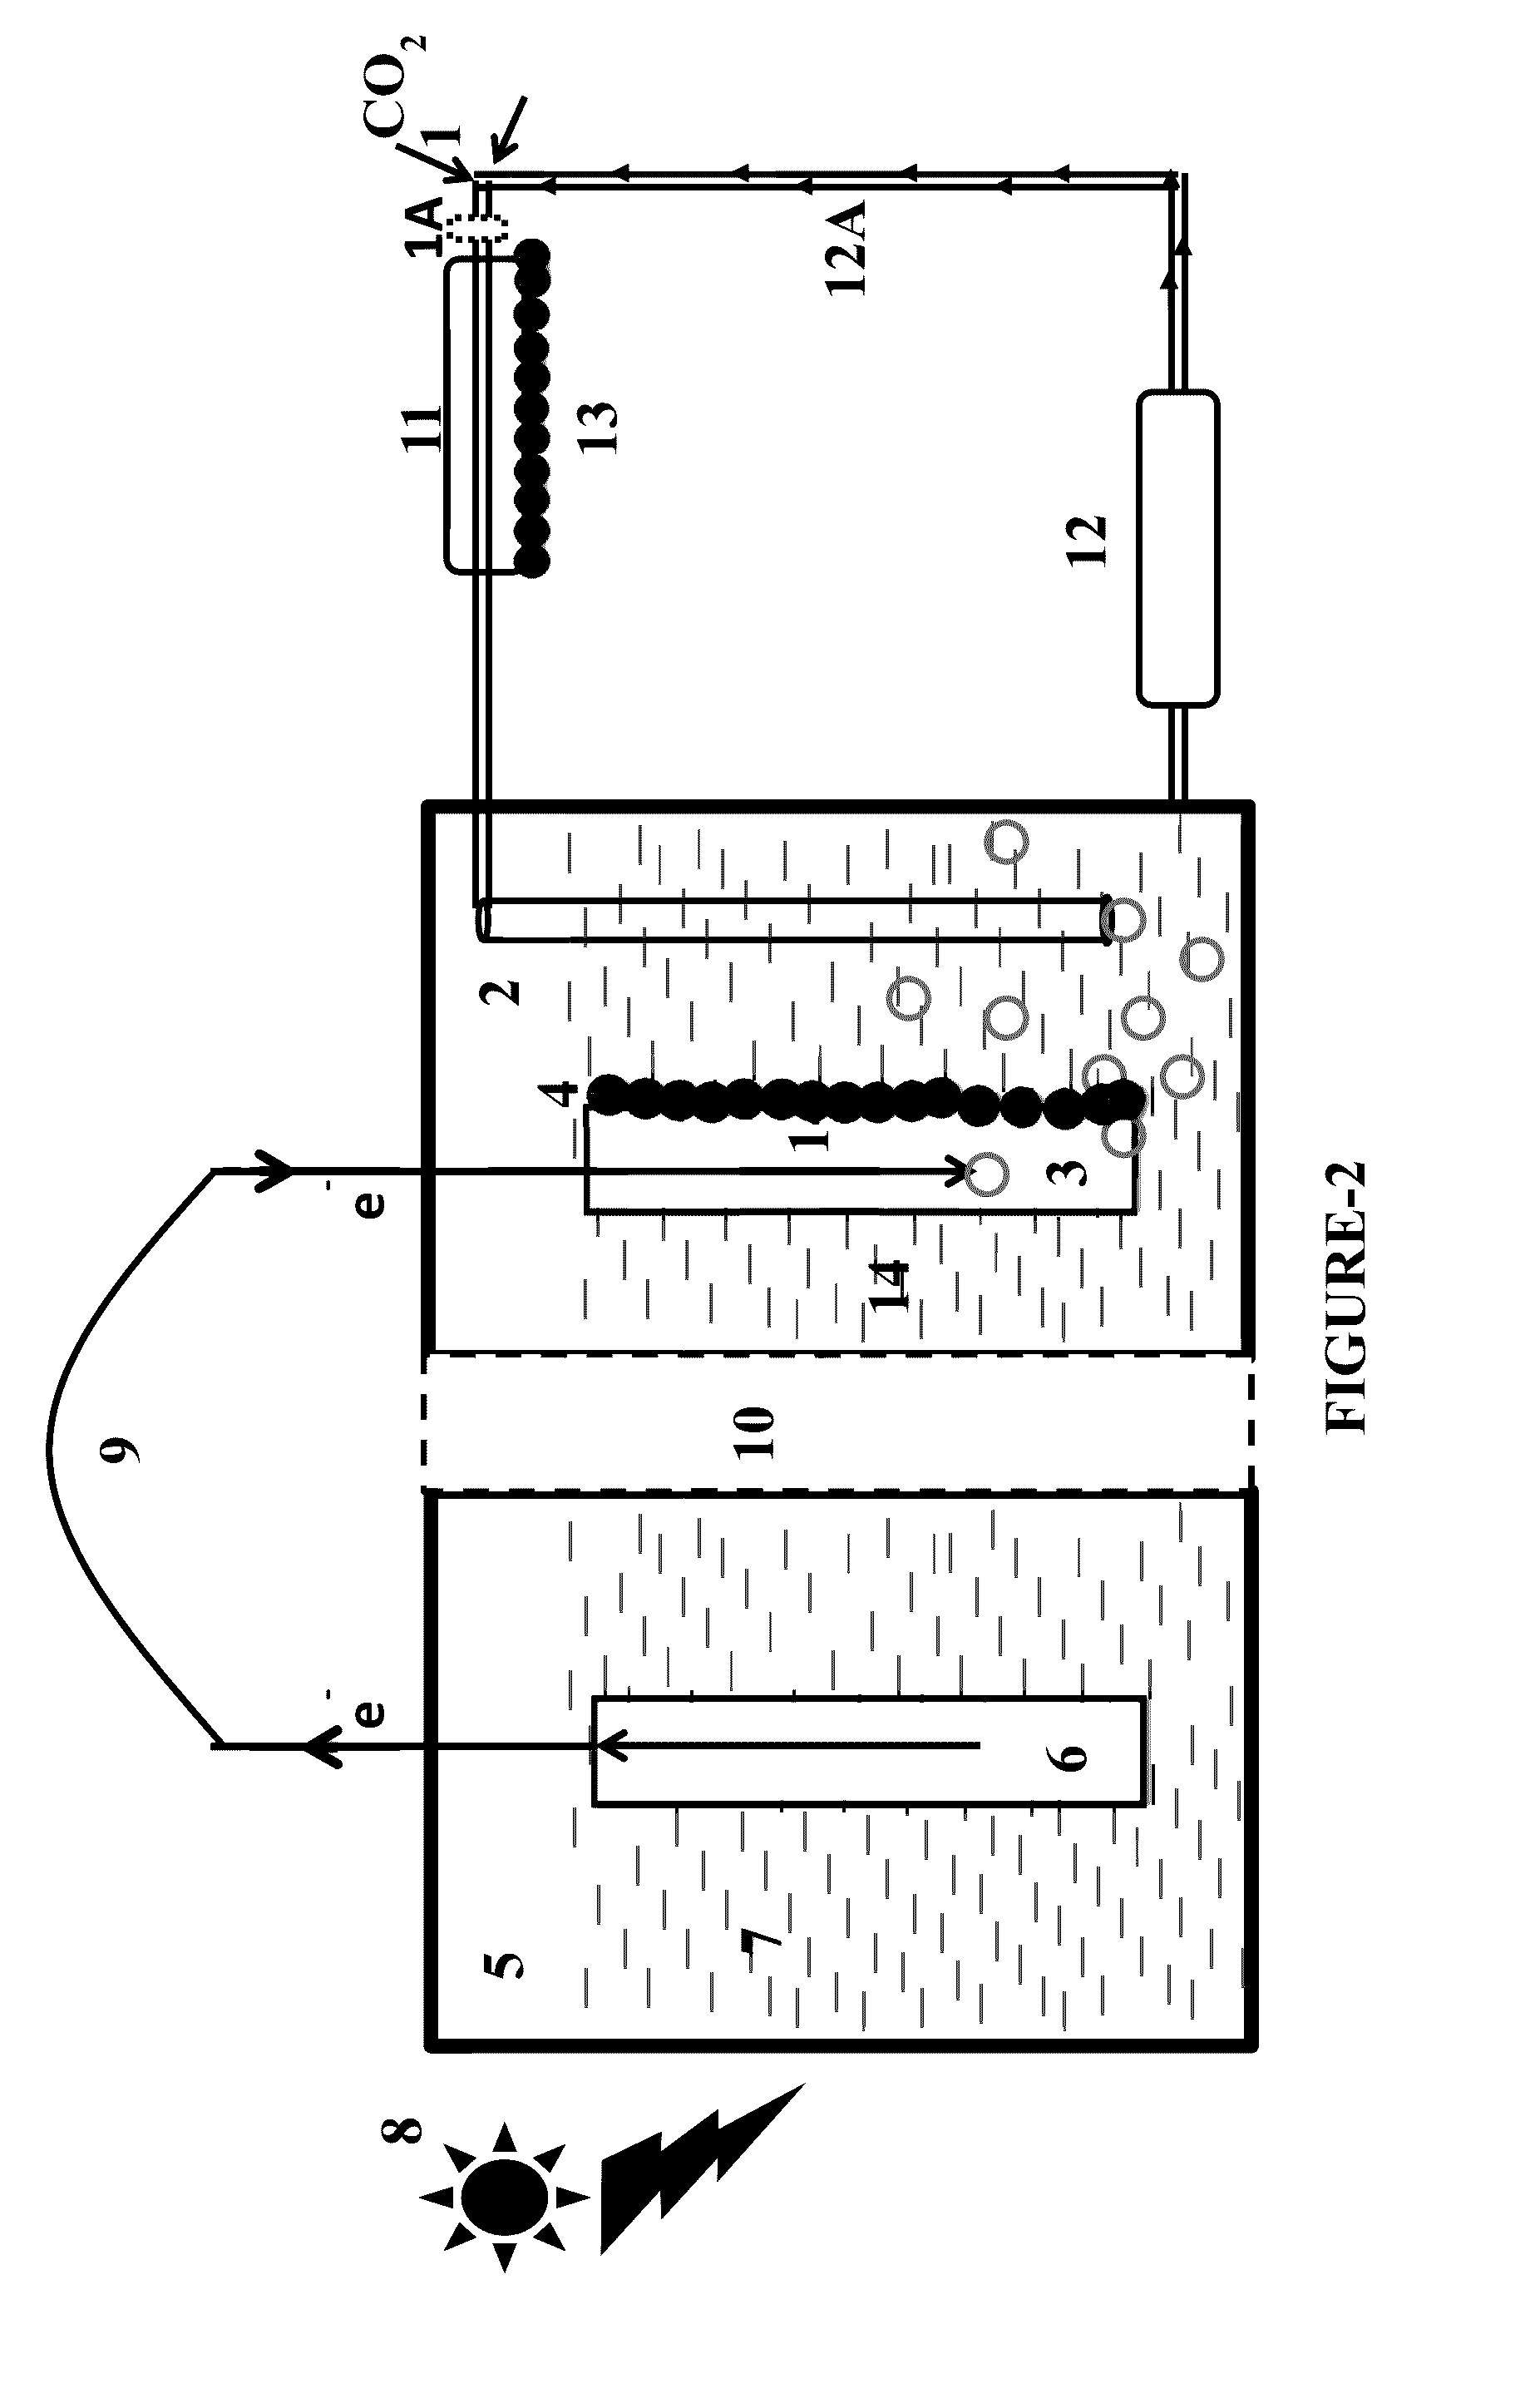 Device and method for conversion of carbon dioxide to organic compounds